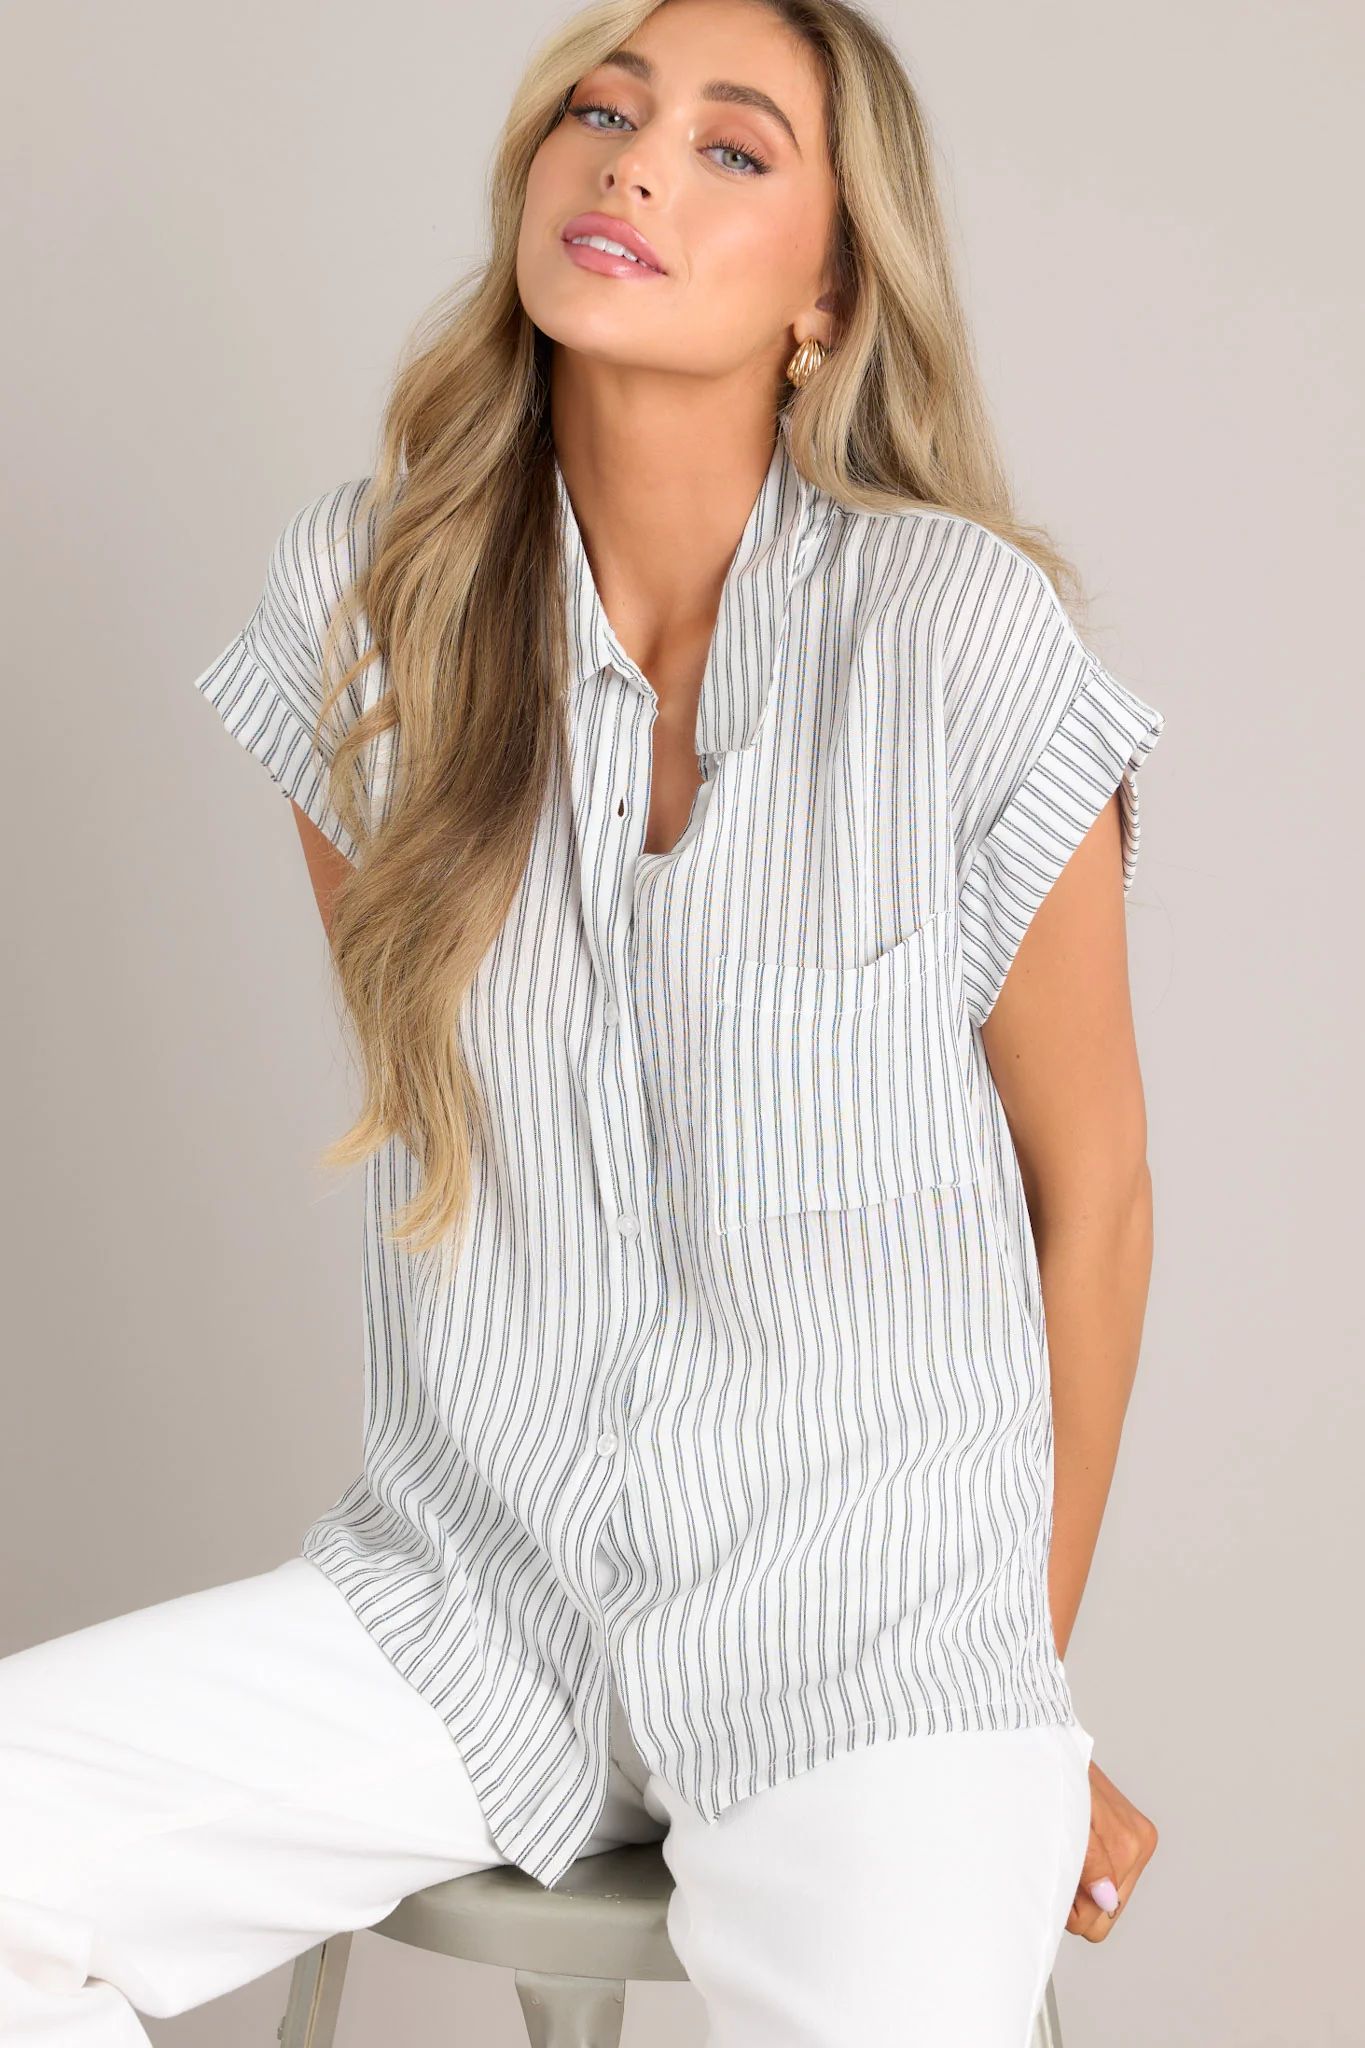 Roots of Renewal Charcoal Stripe Button Front Top | Red Dress